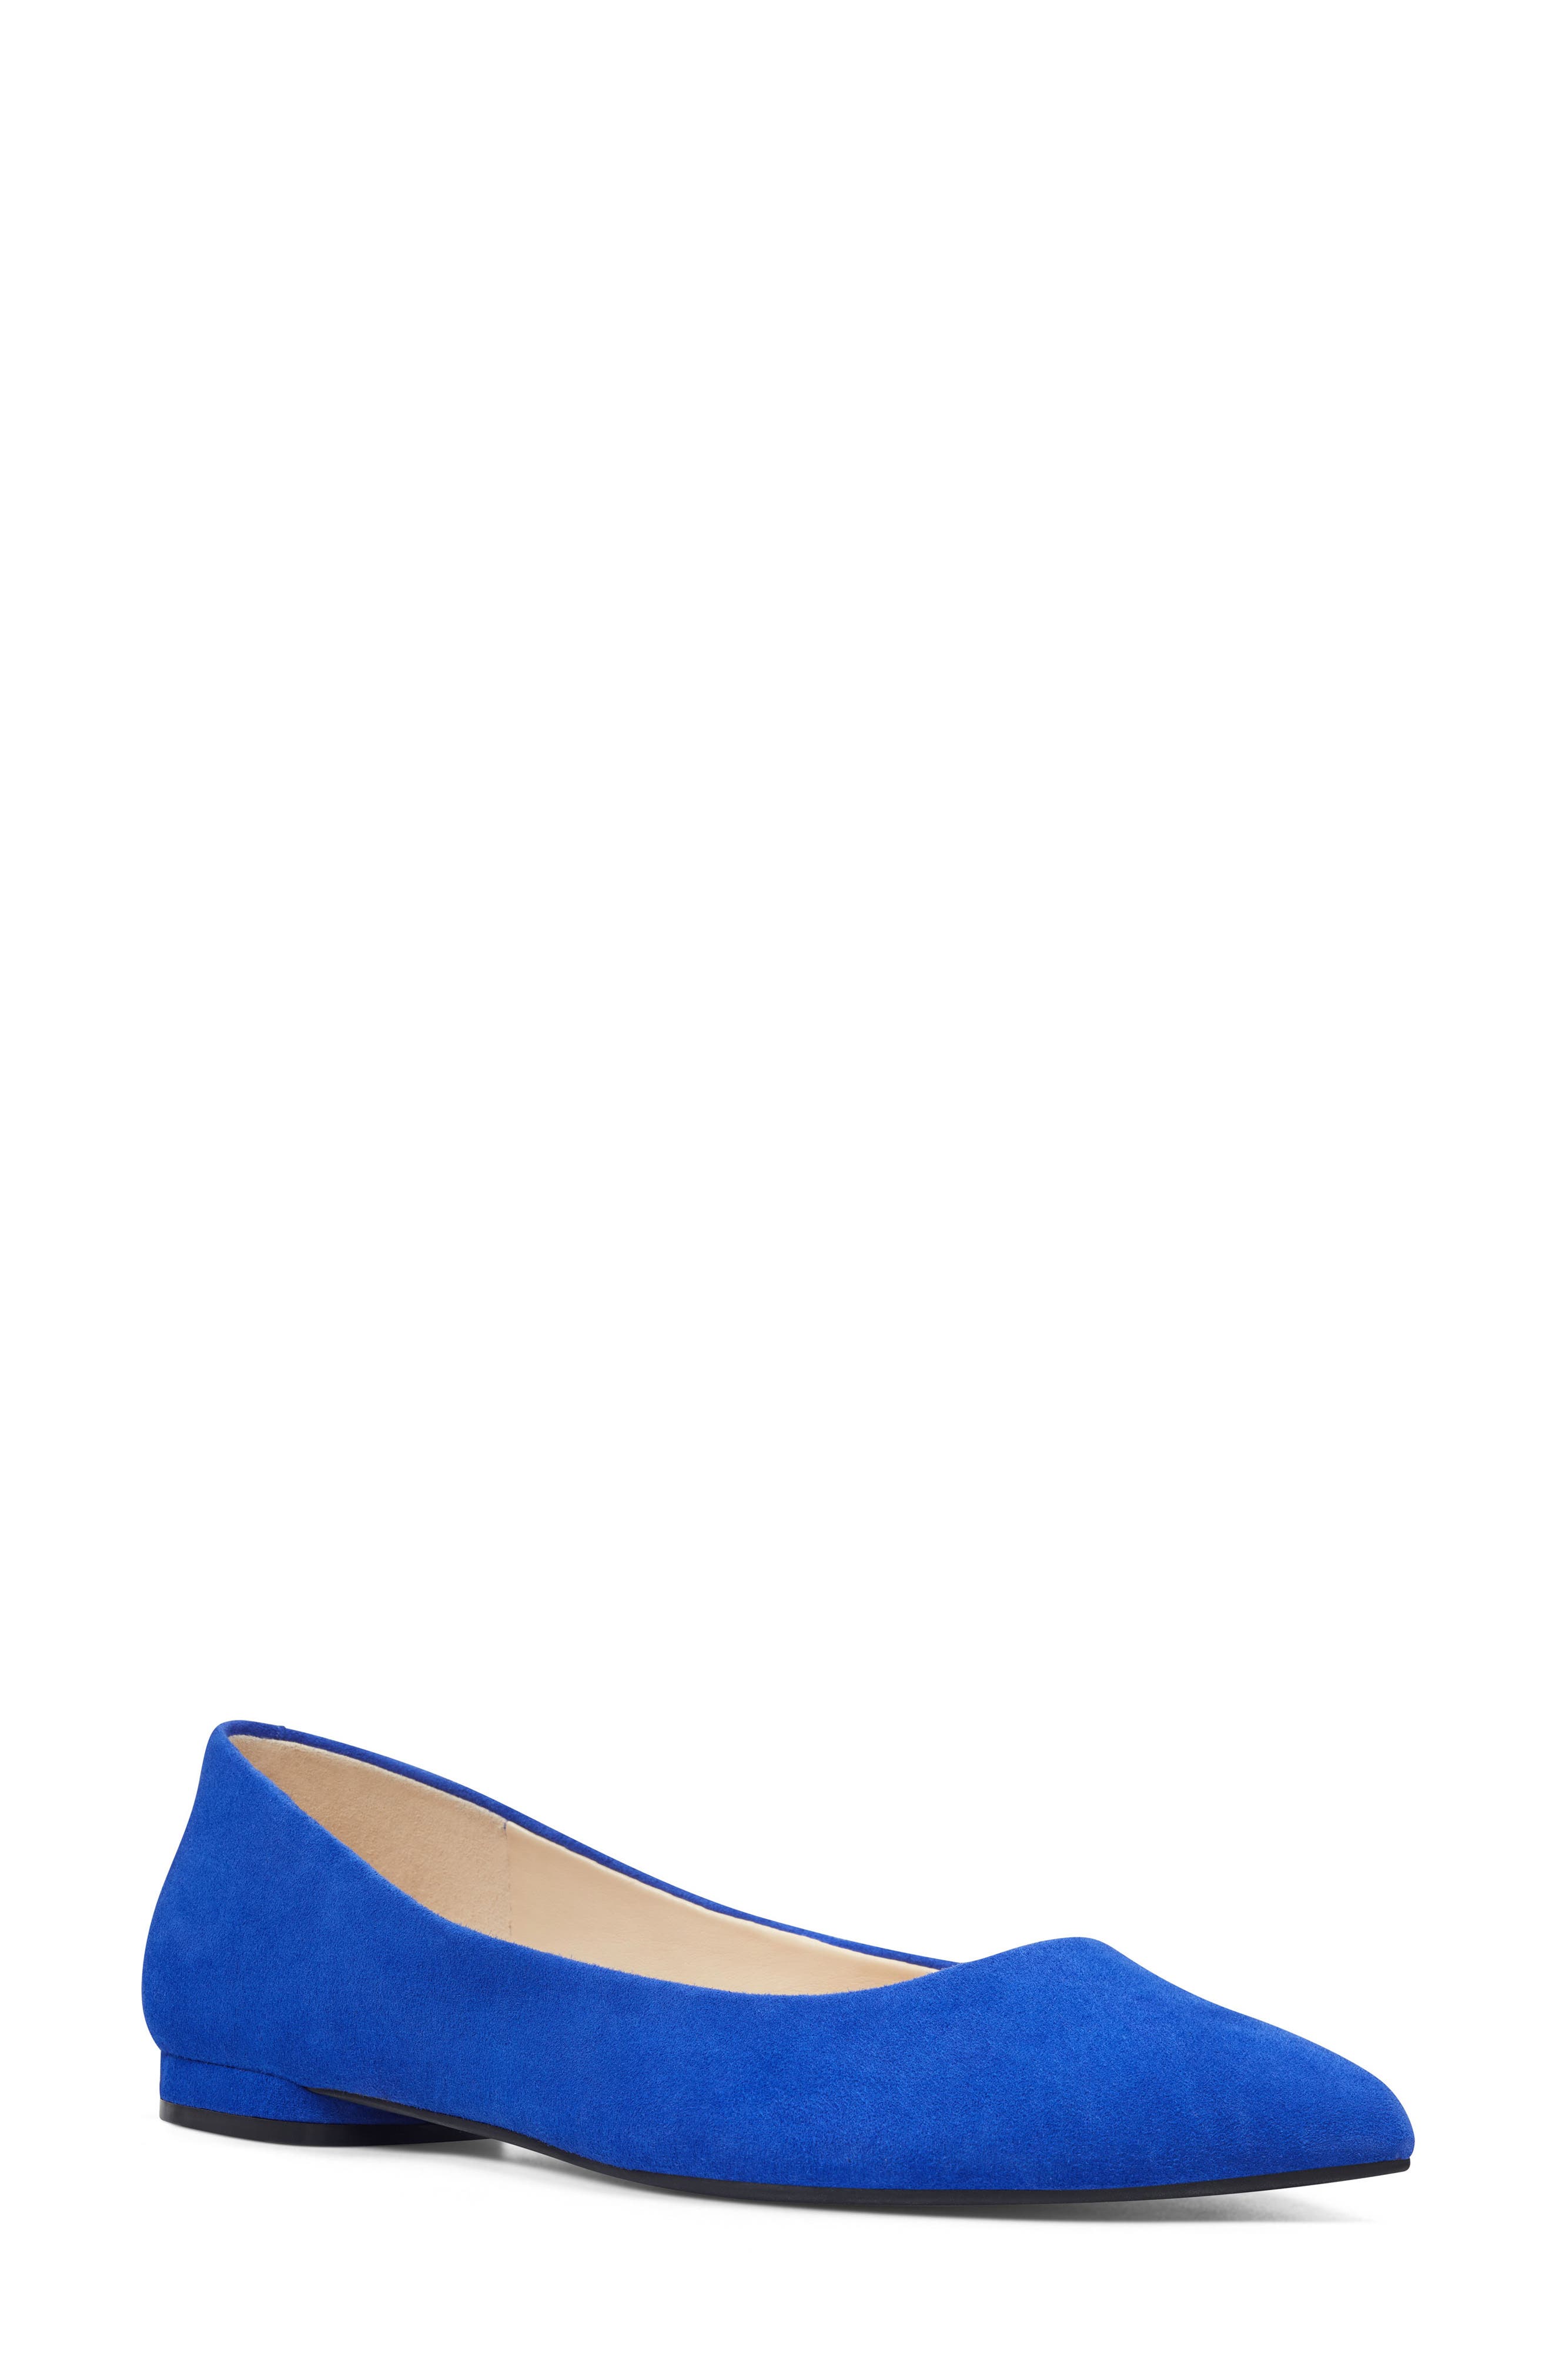 onlee pointed toe flats